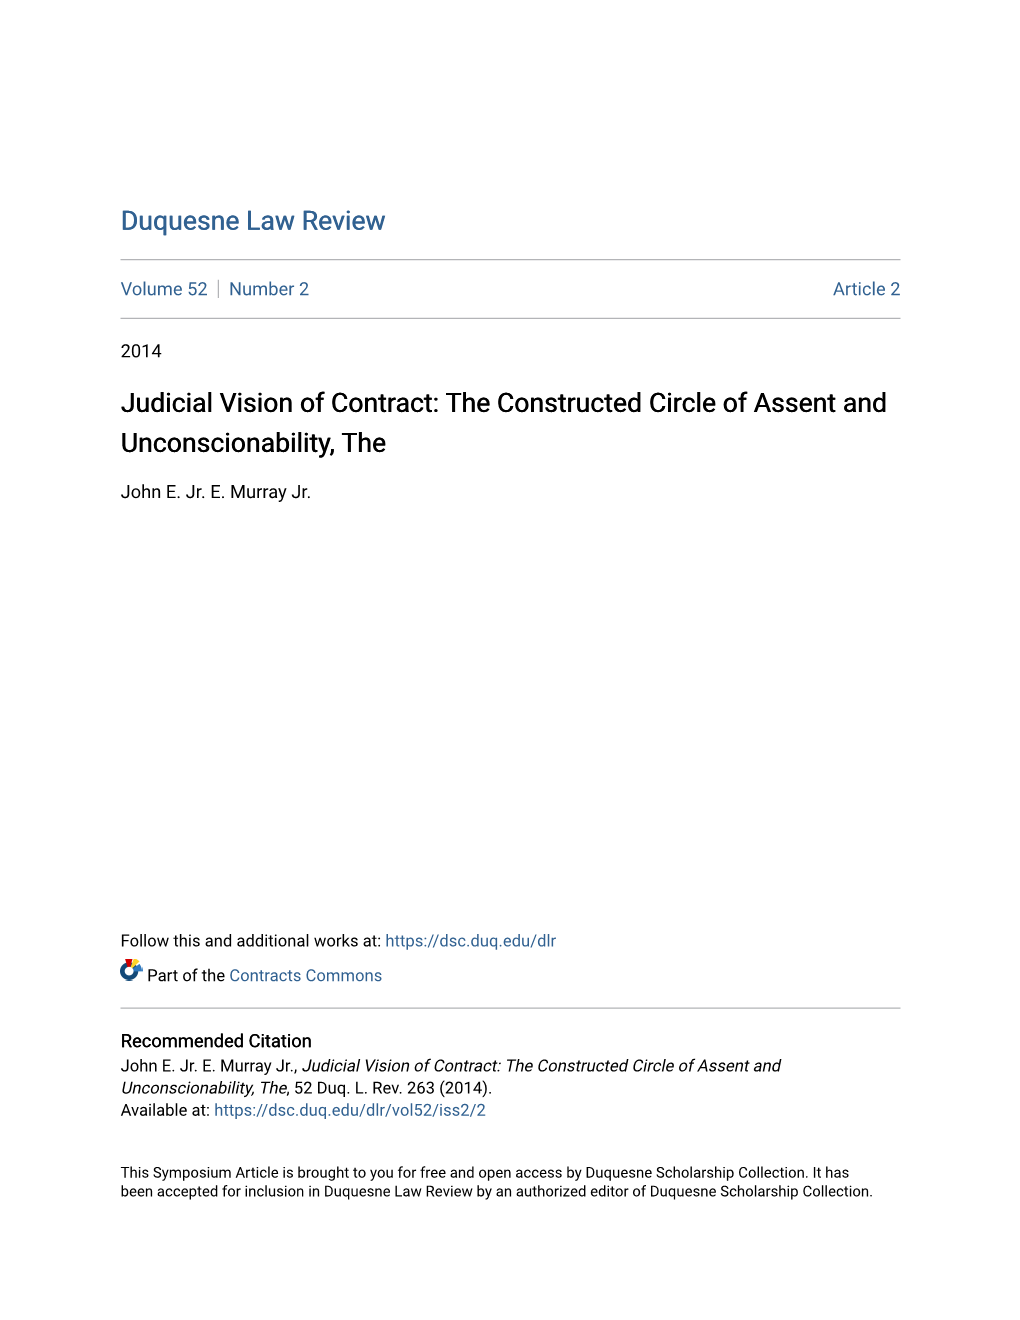 Judicial Vision of Contract: the Constructed Circle of Assent and Unconscionability, The